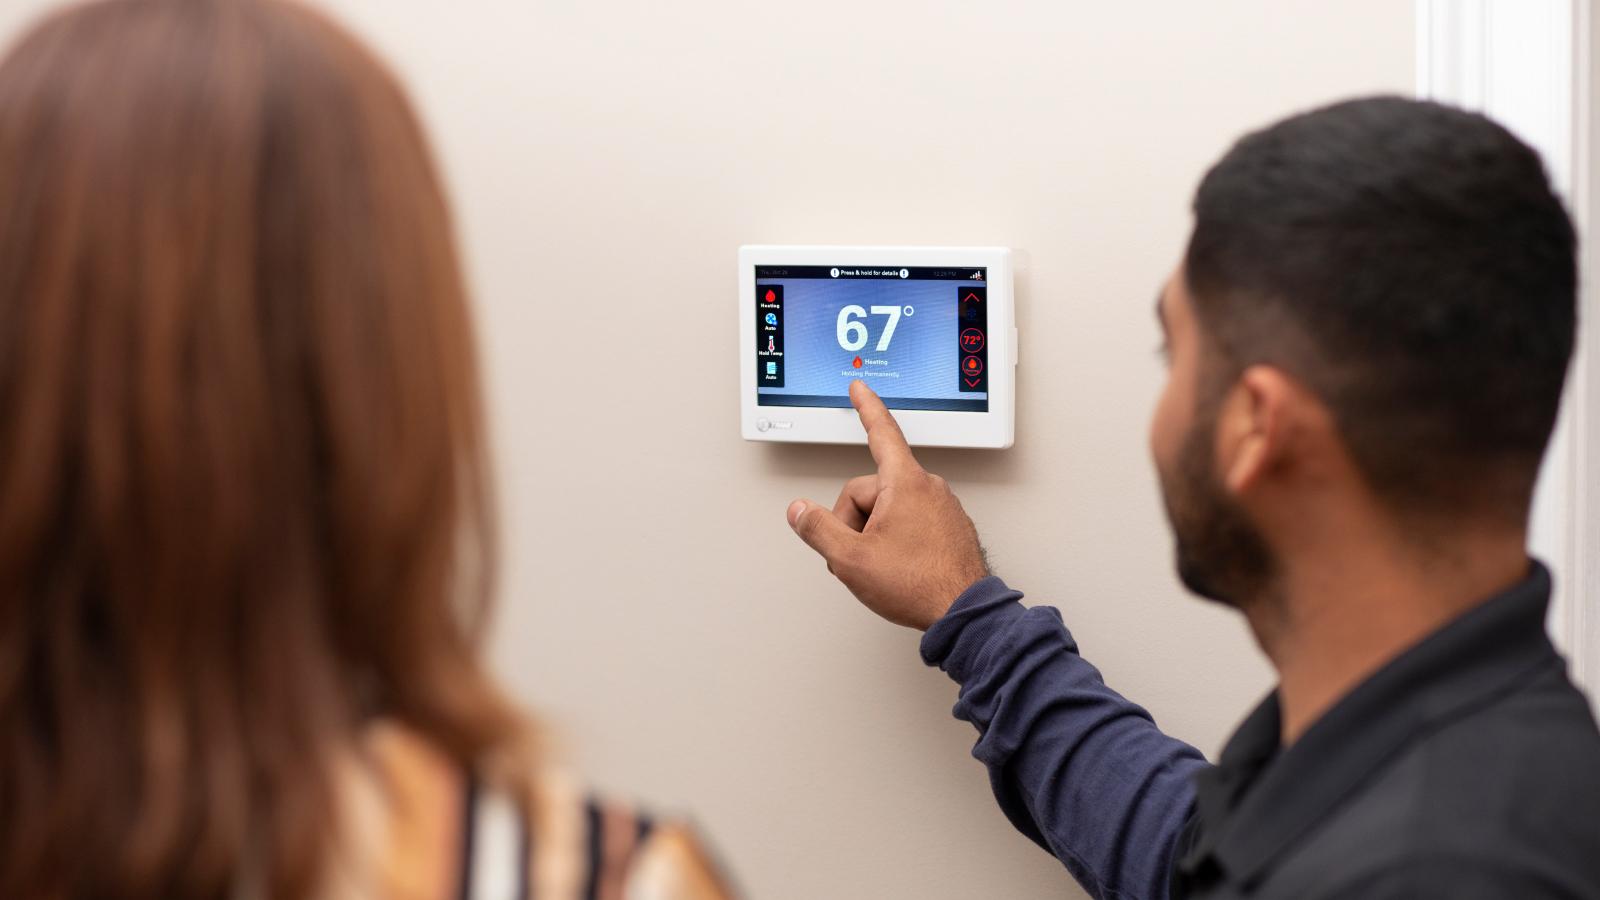 A man shows a woman a Trane smart thermostat reading 67 degrees by pointing at the number on the screen.